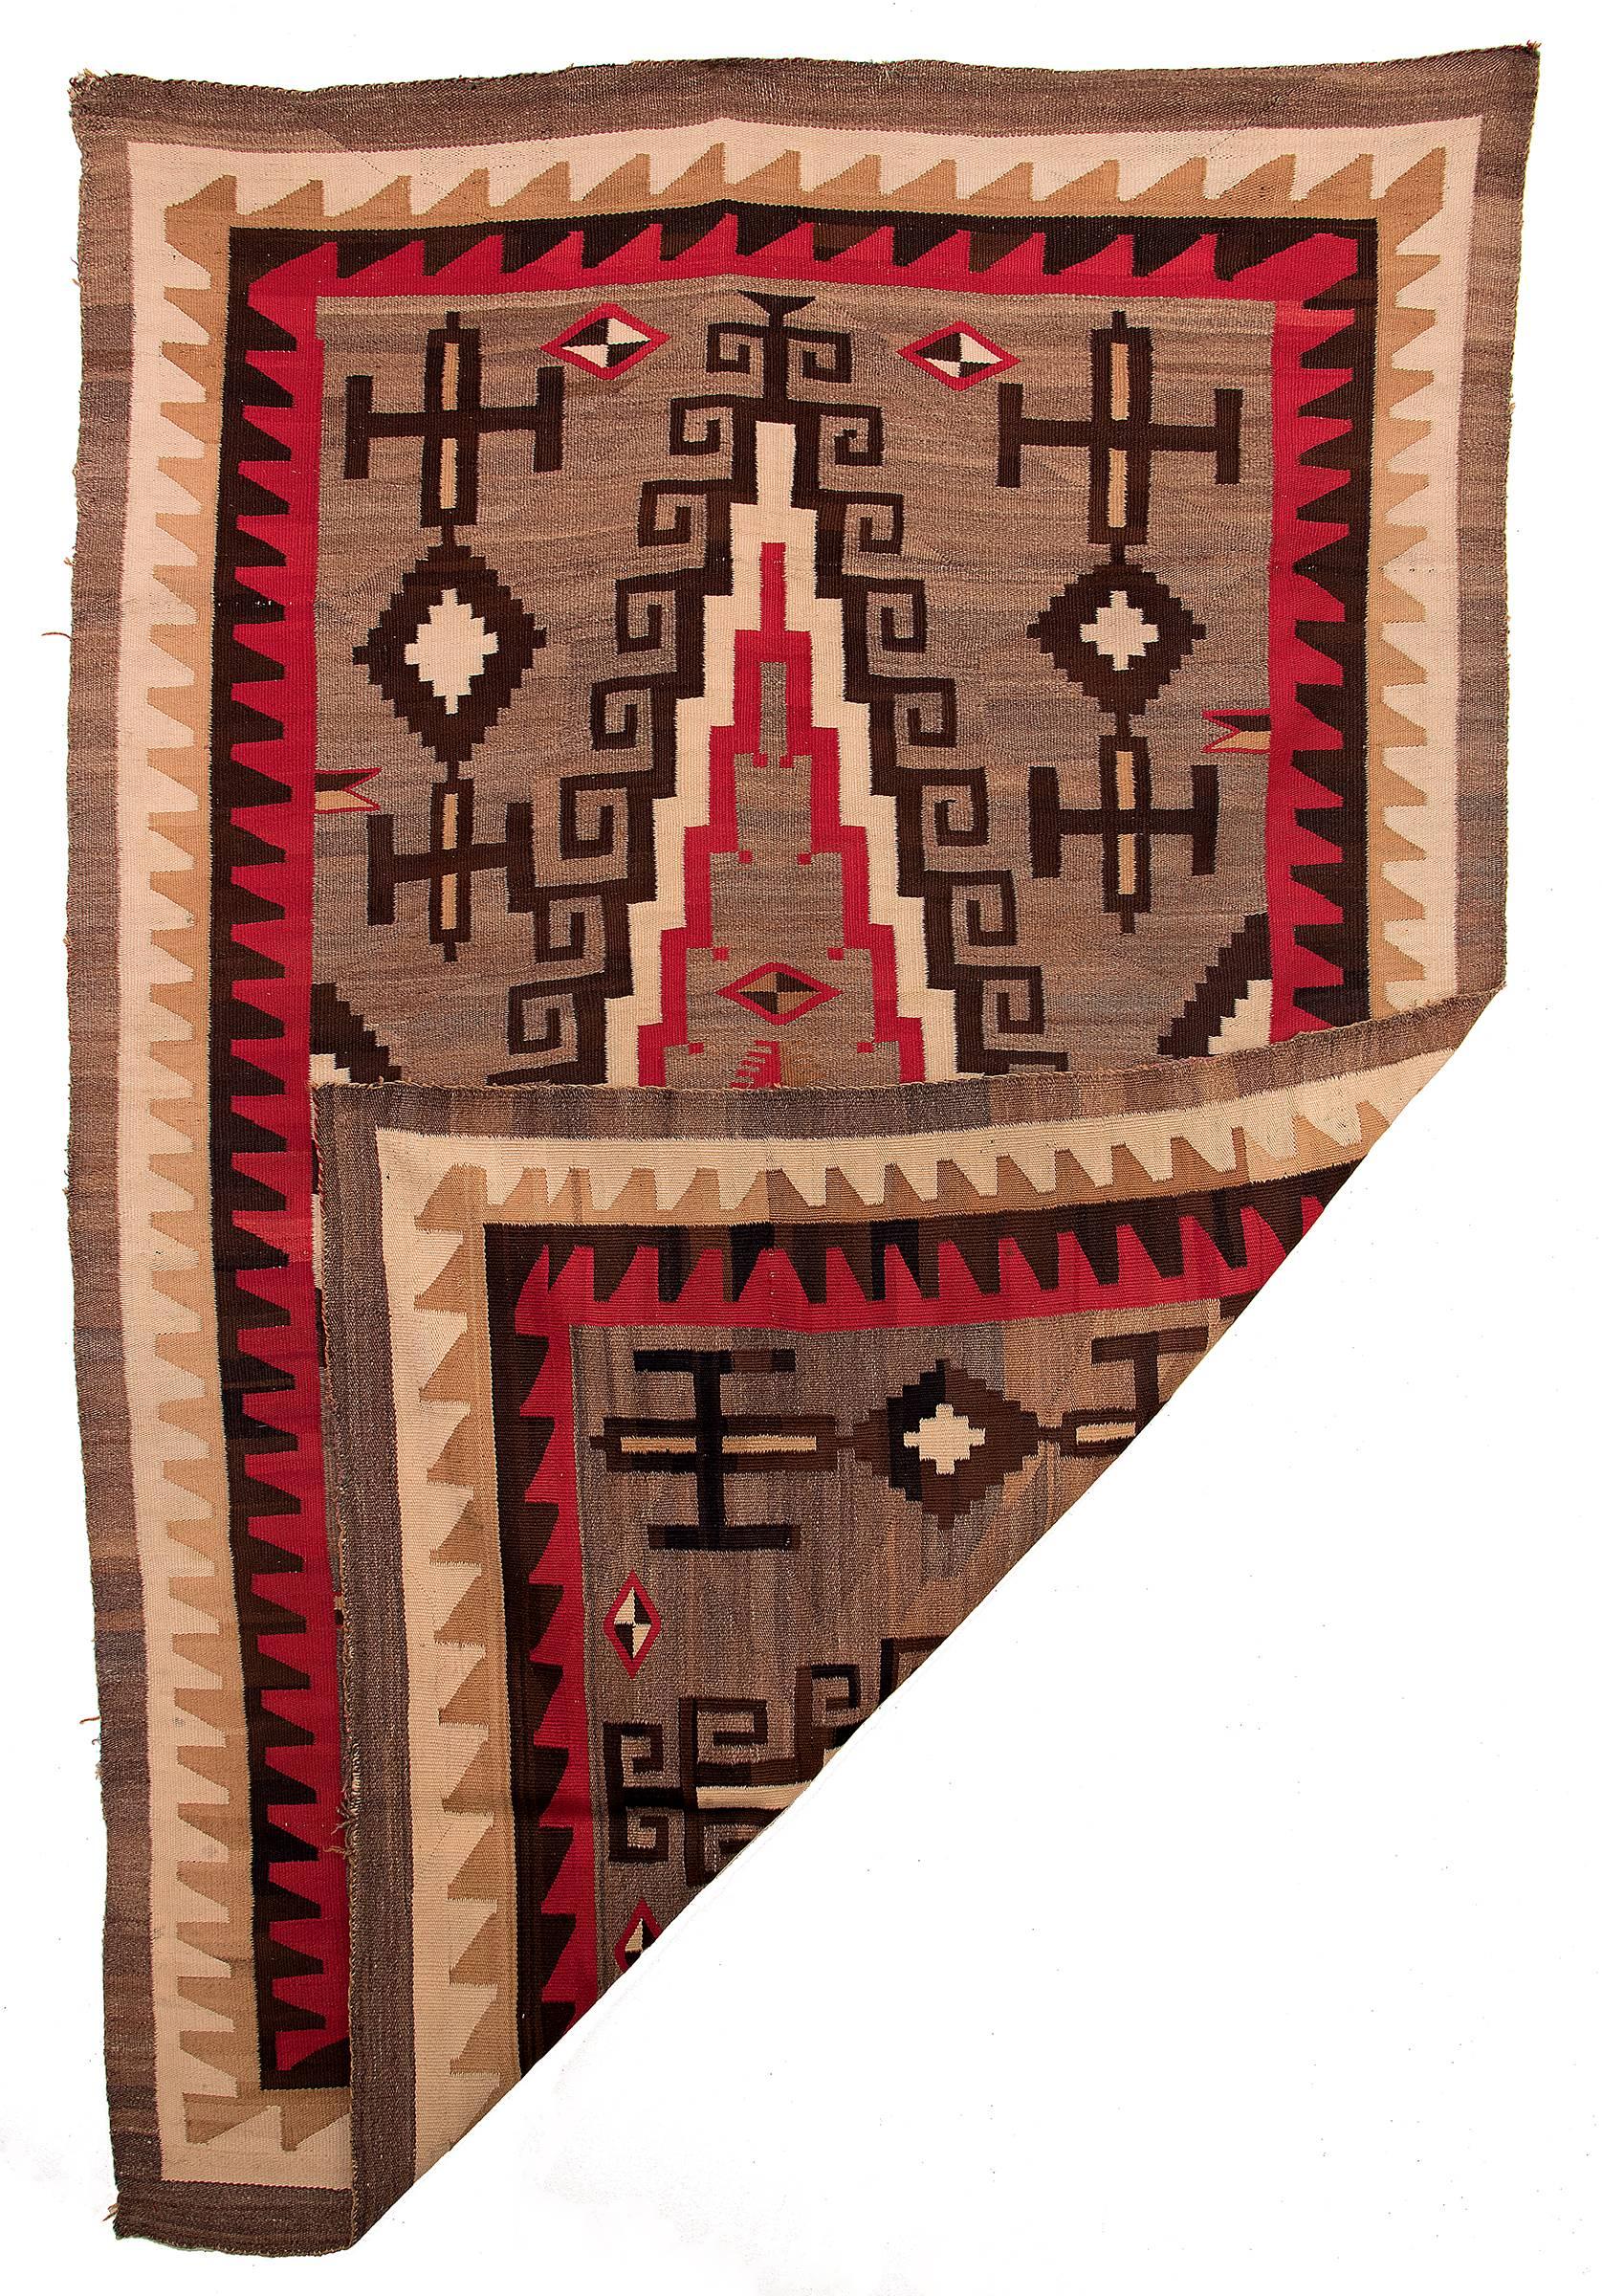 A regional rug, likely woven at Ganado (Hubbell Trading Post) in Arizona. This textile is woven of natural black, gray, ivory and camel/light brown fleece with aniline red.

This textile is well suited for use on the floor as an area rug, as a